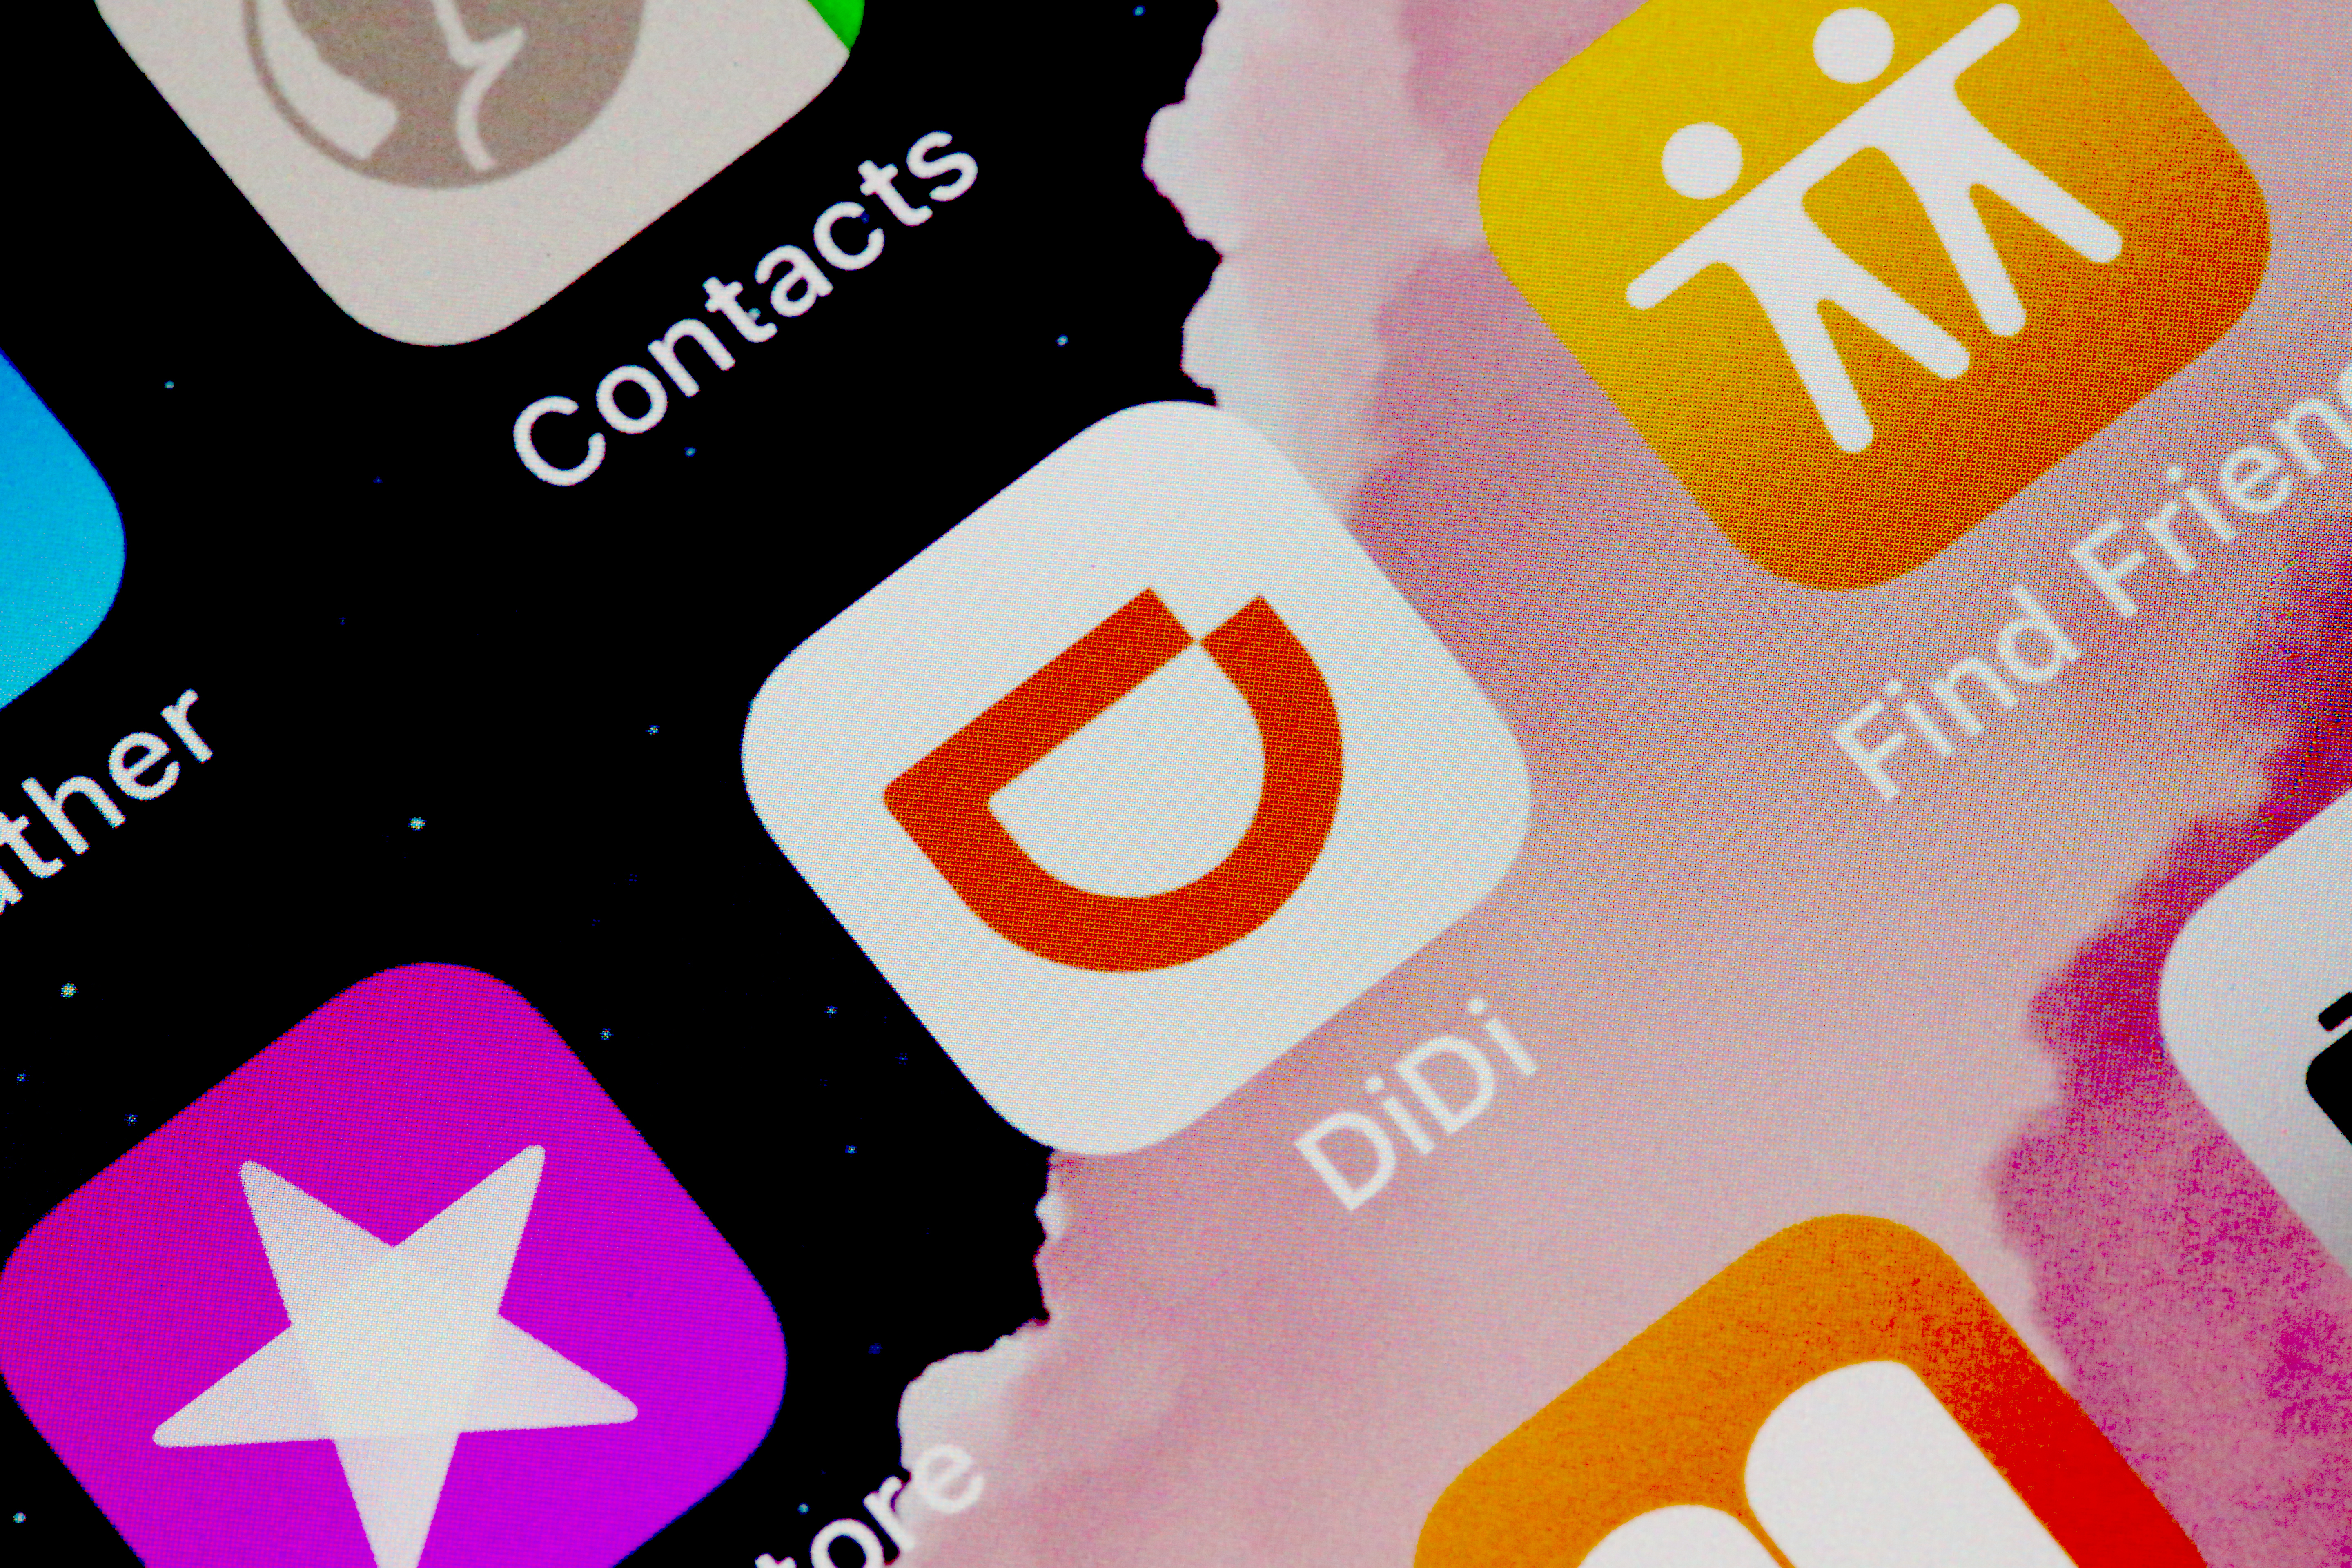 Didi ties up with finance giant Ping An to cooperate in car rental, insurance and EV charging